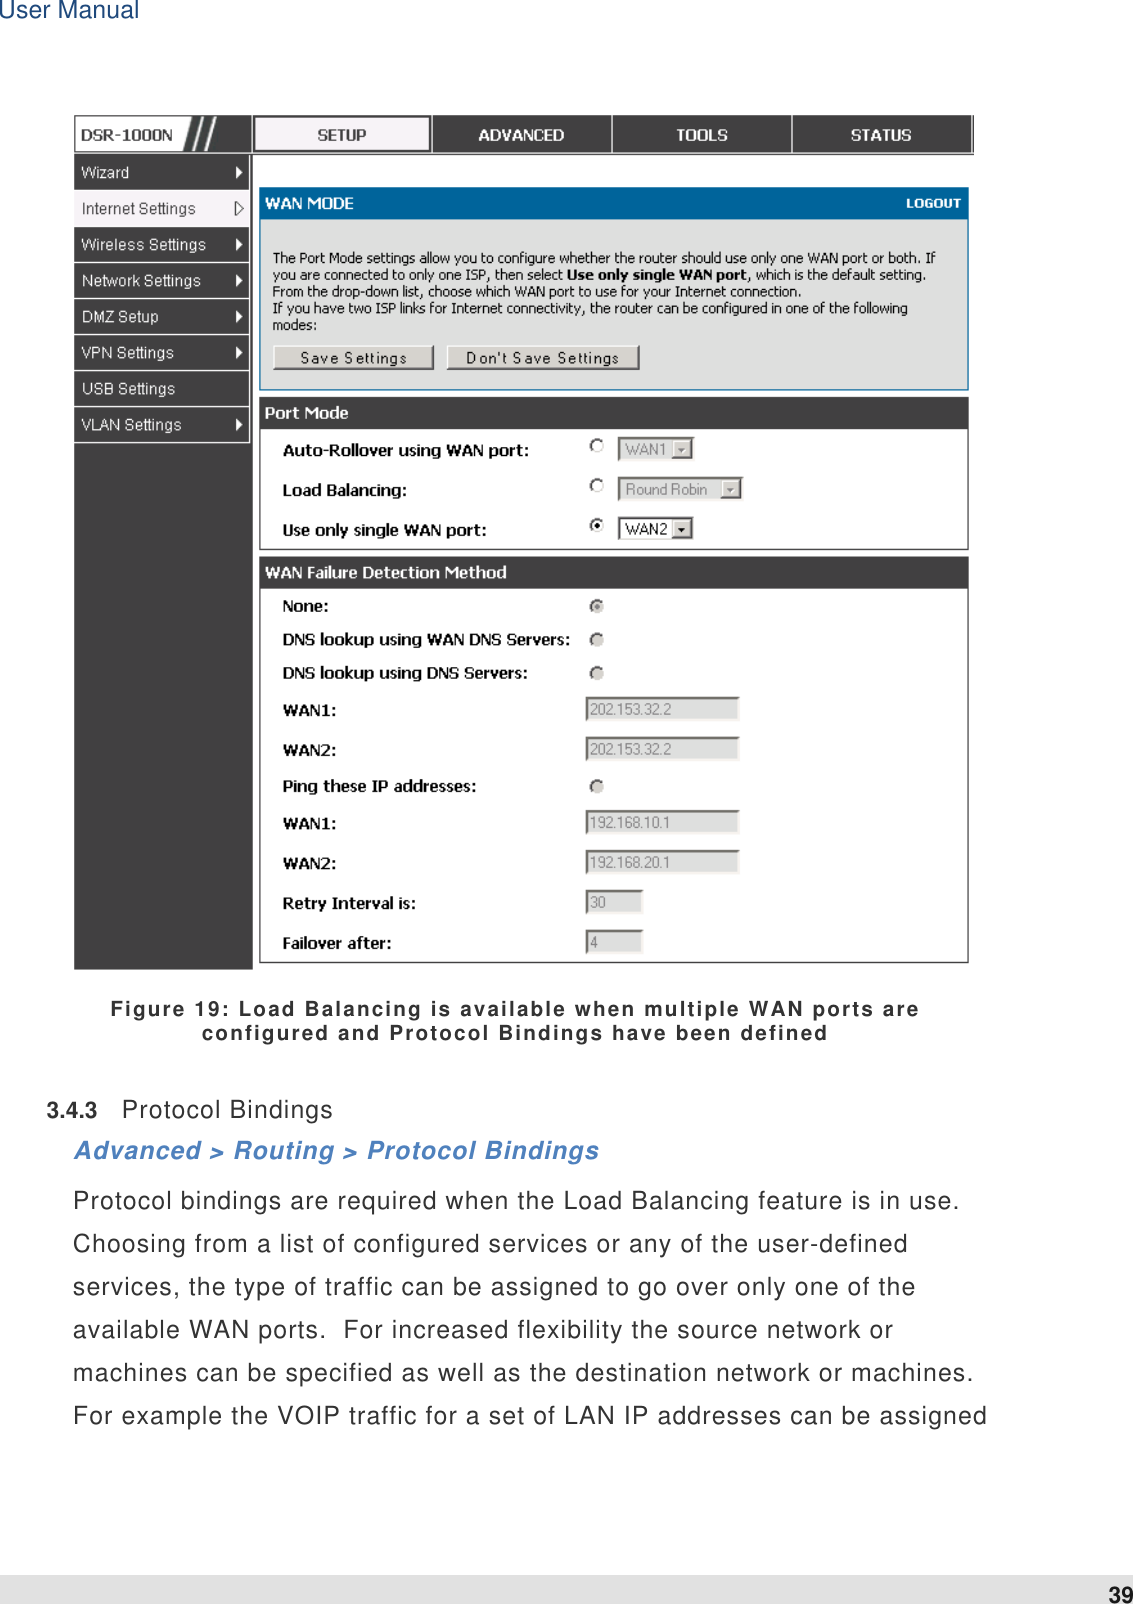 User Manual 39    Figure 19: Load Balancing is available when multiple WAN ports are configured and Protocol Bindings have been defined 3.4.3  Protocol Bindings Advanced &gt; Routing &gt; Protocol Bindings Protocol bindings are required when the Load Balancing feature is in use.  Choosing from a list of configured services or any of the user-defined services, the type of traffic can be assigned to go over only one of the available WAN ports.  For increased flexibility the source network or machines can be specified as well as the destination network or machines.  For example the VOIP traffic for a set of LAN IP addresses can be assigned 